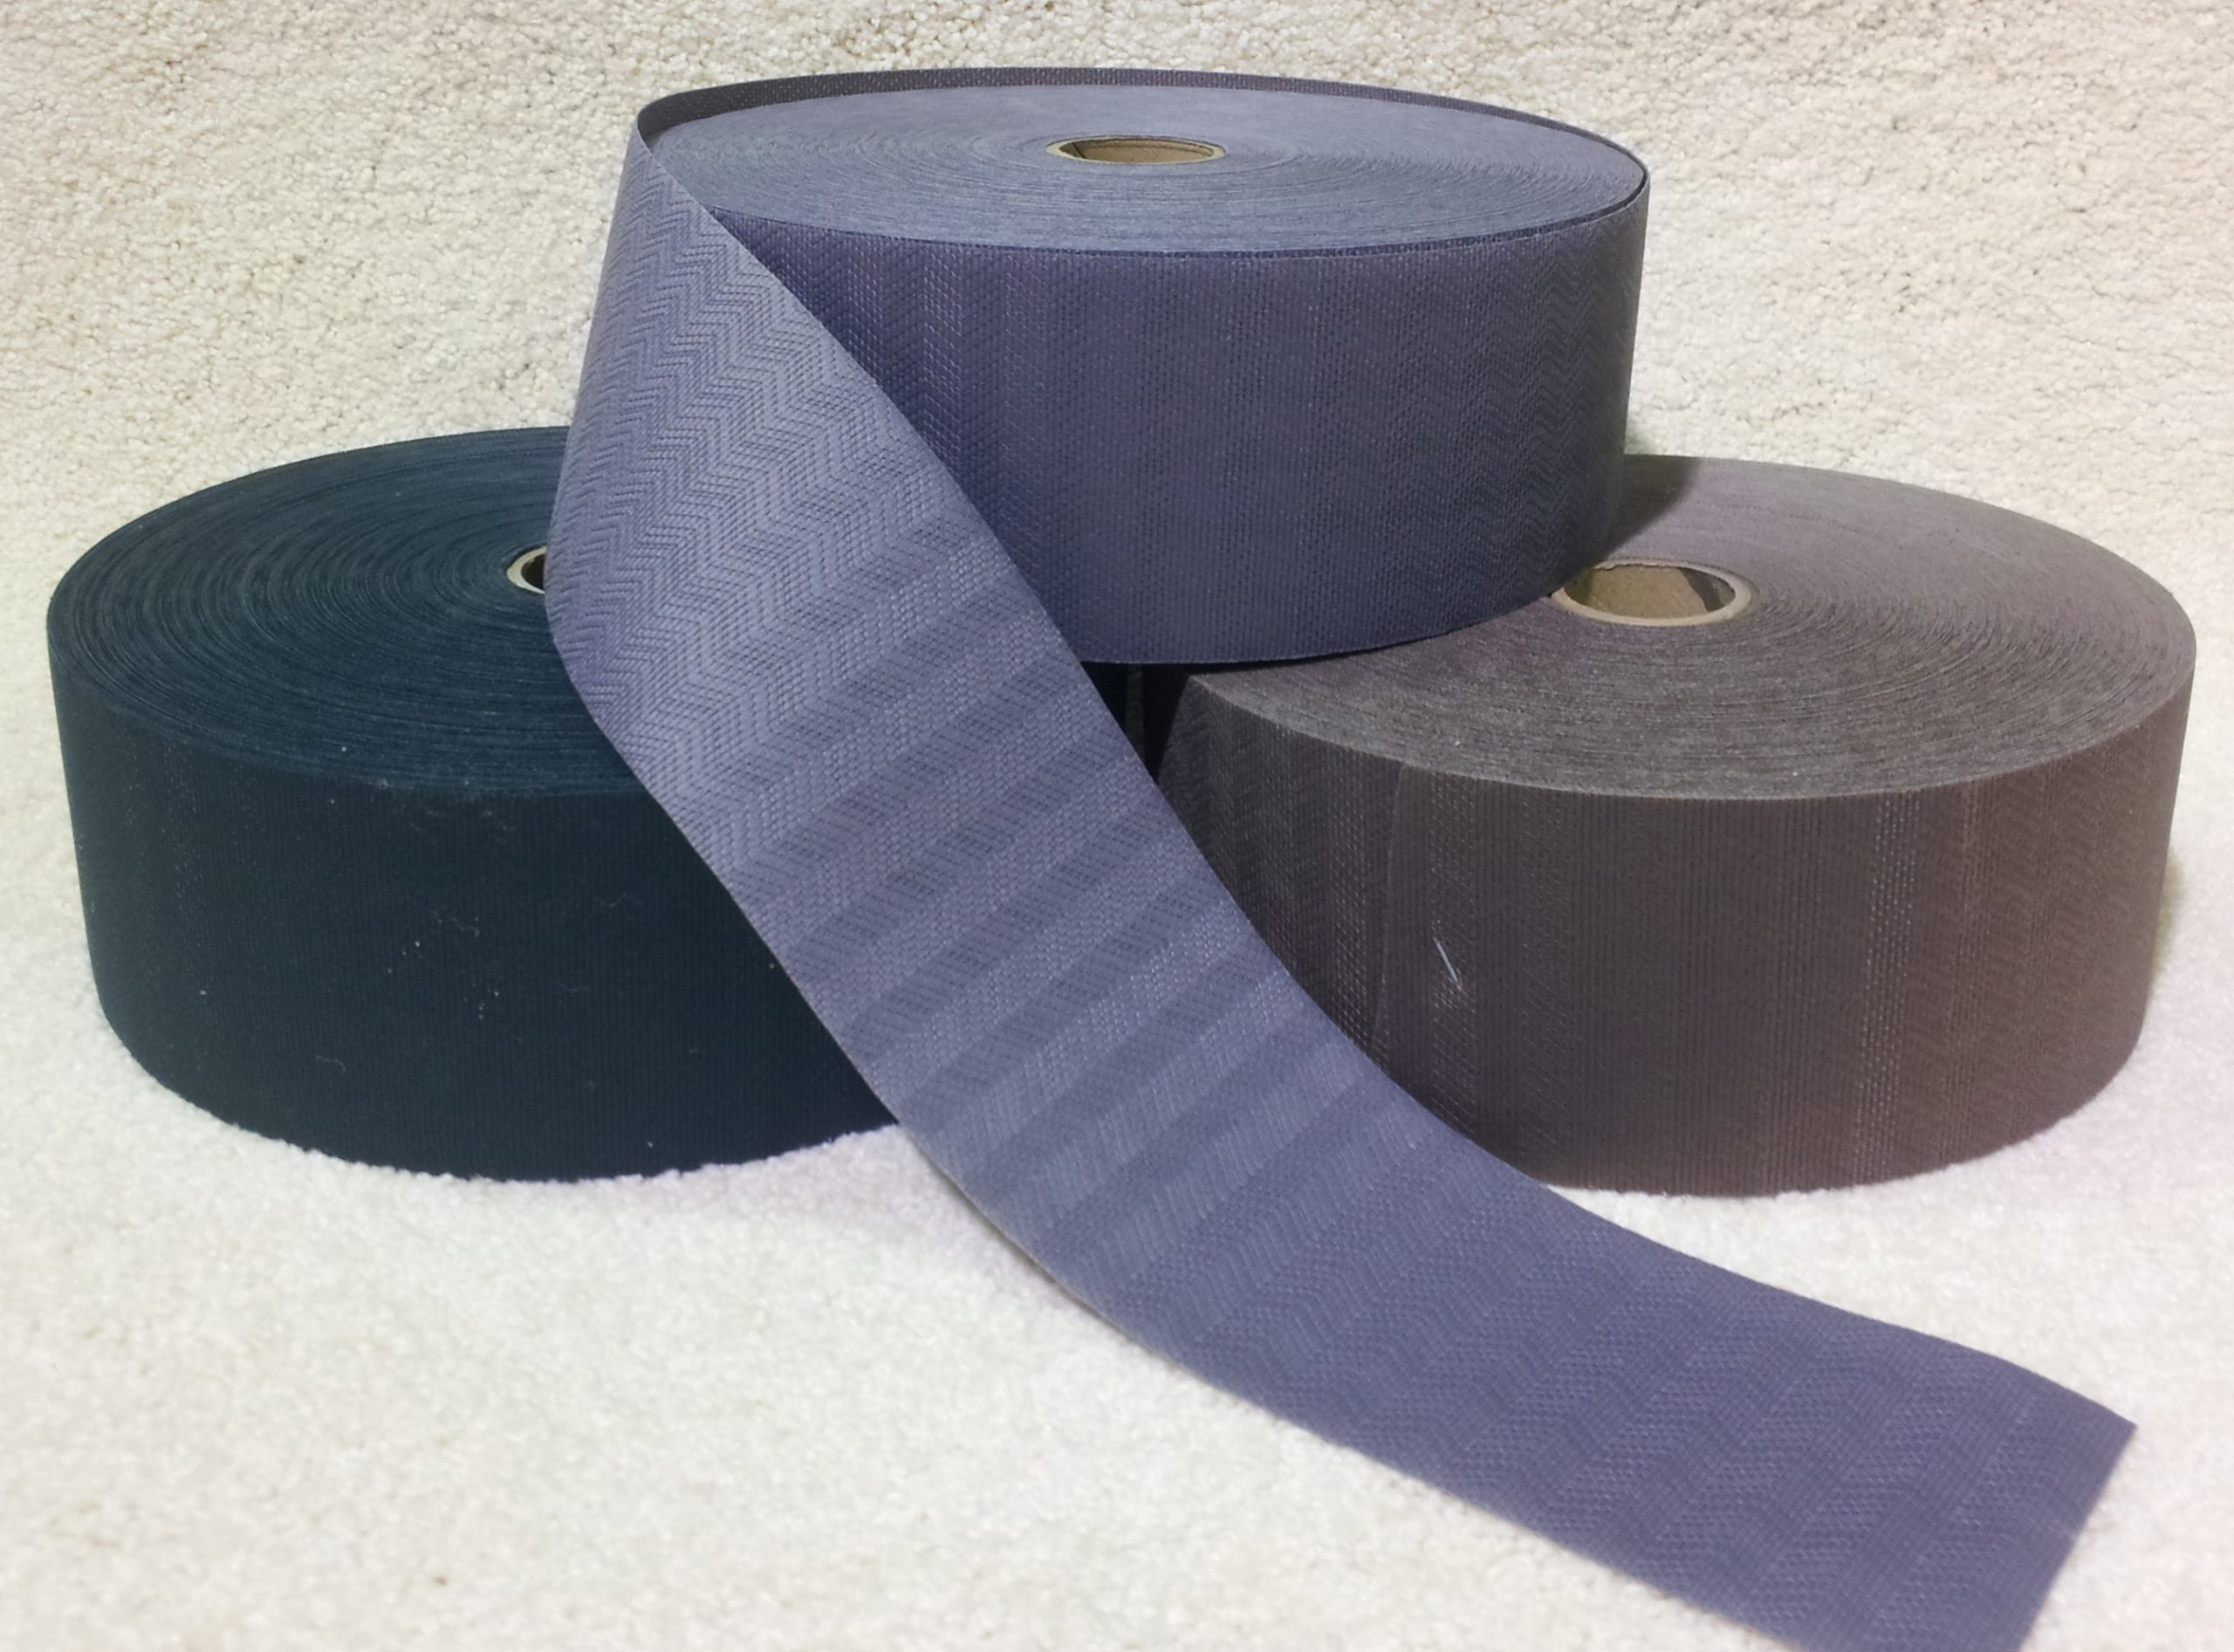 Spine-binding tape  Adhesive products, fastening, packaging material